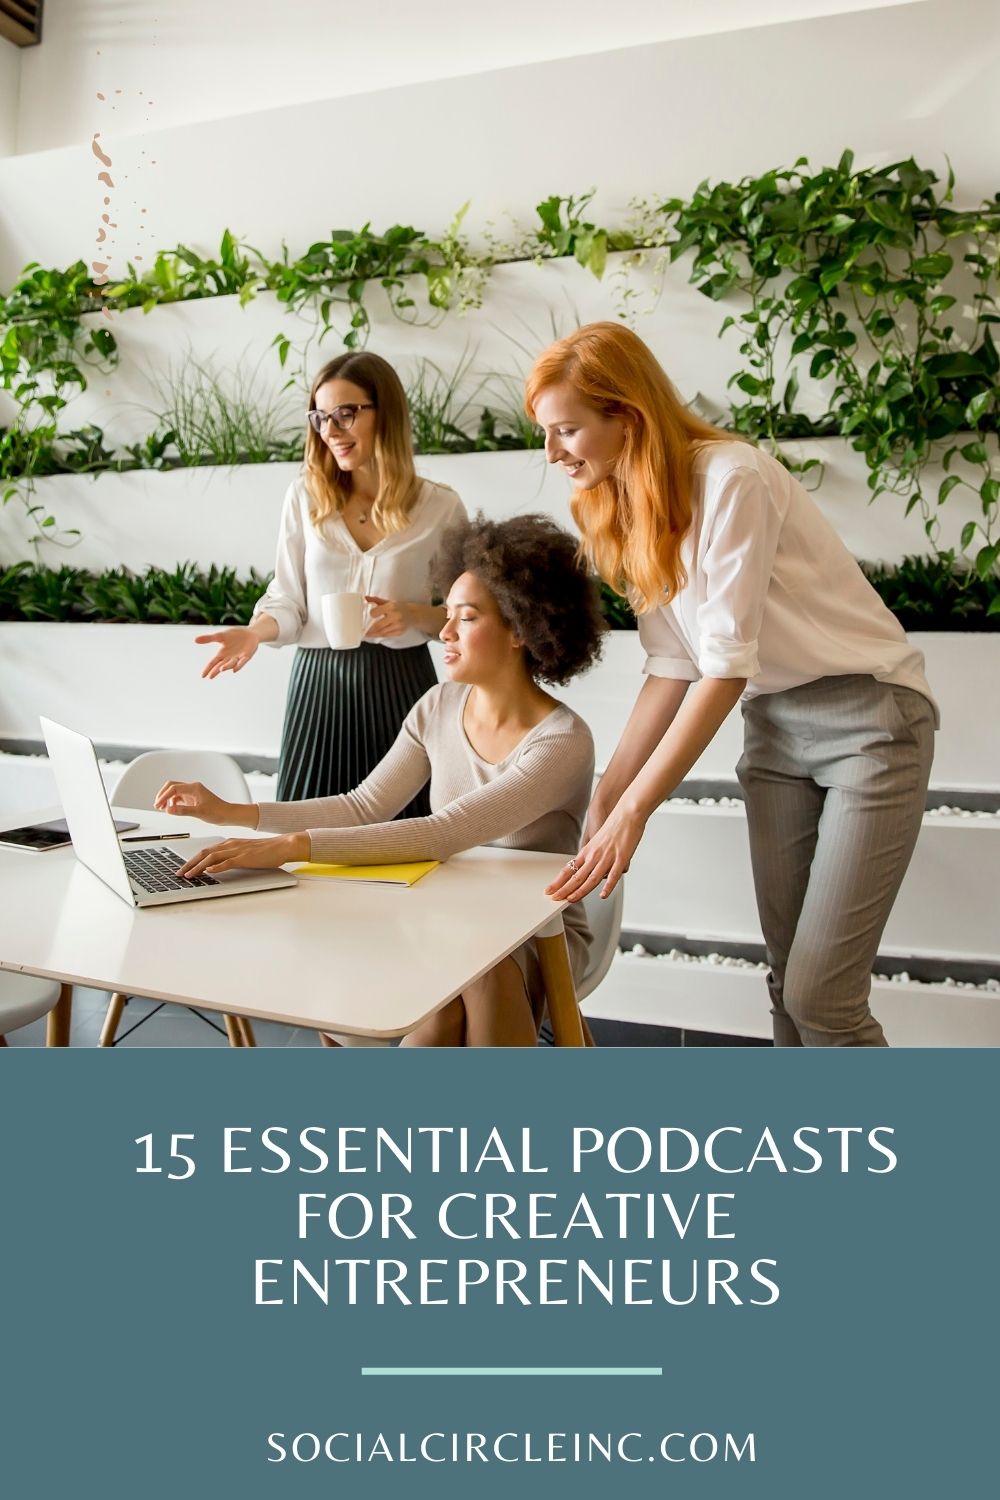 15 Essential Podcasts